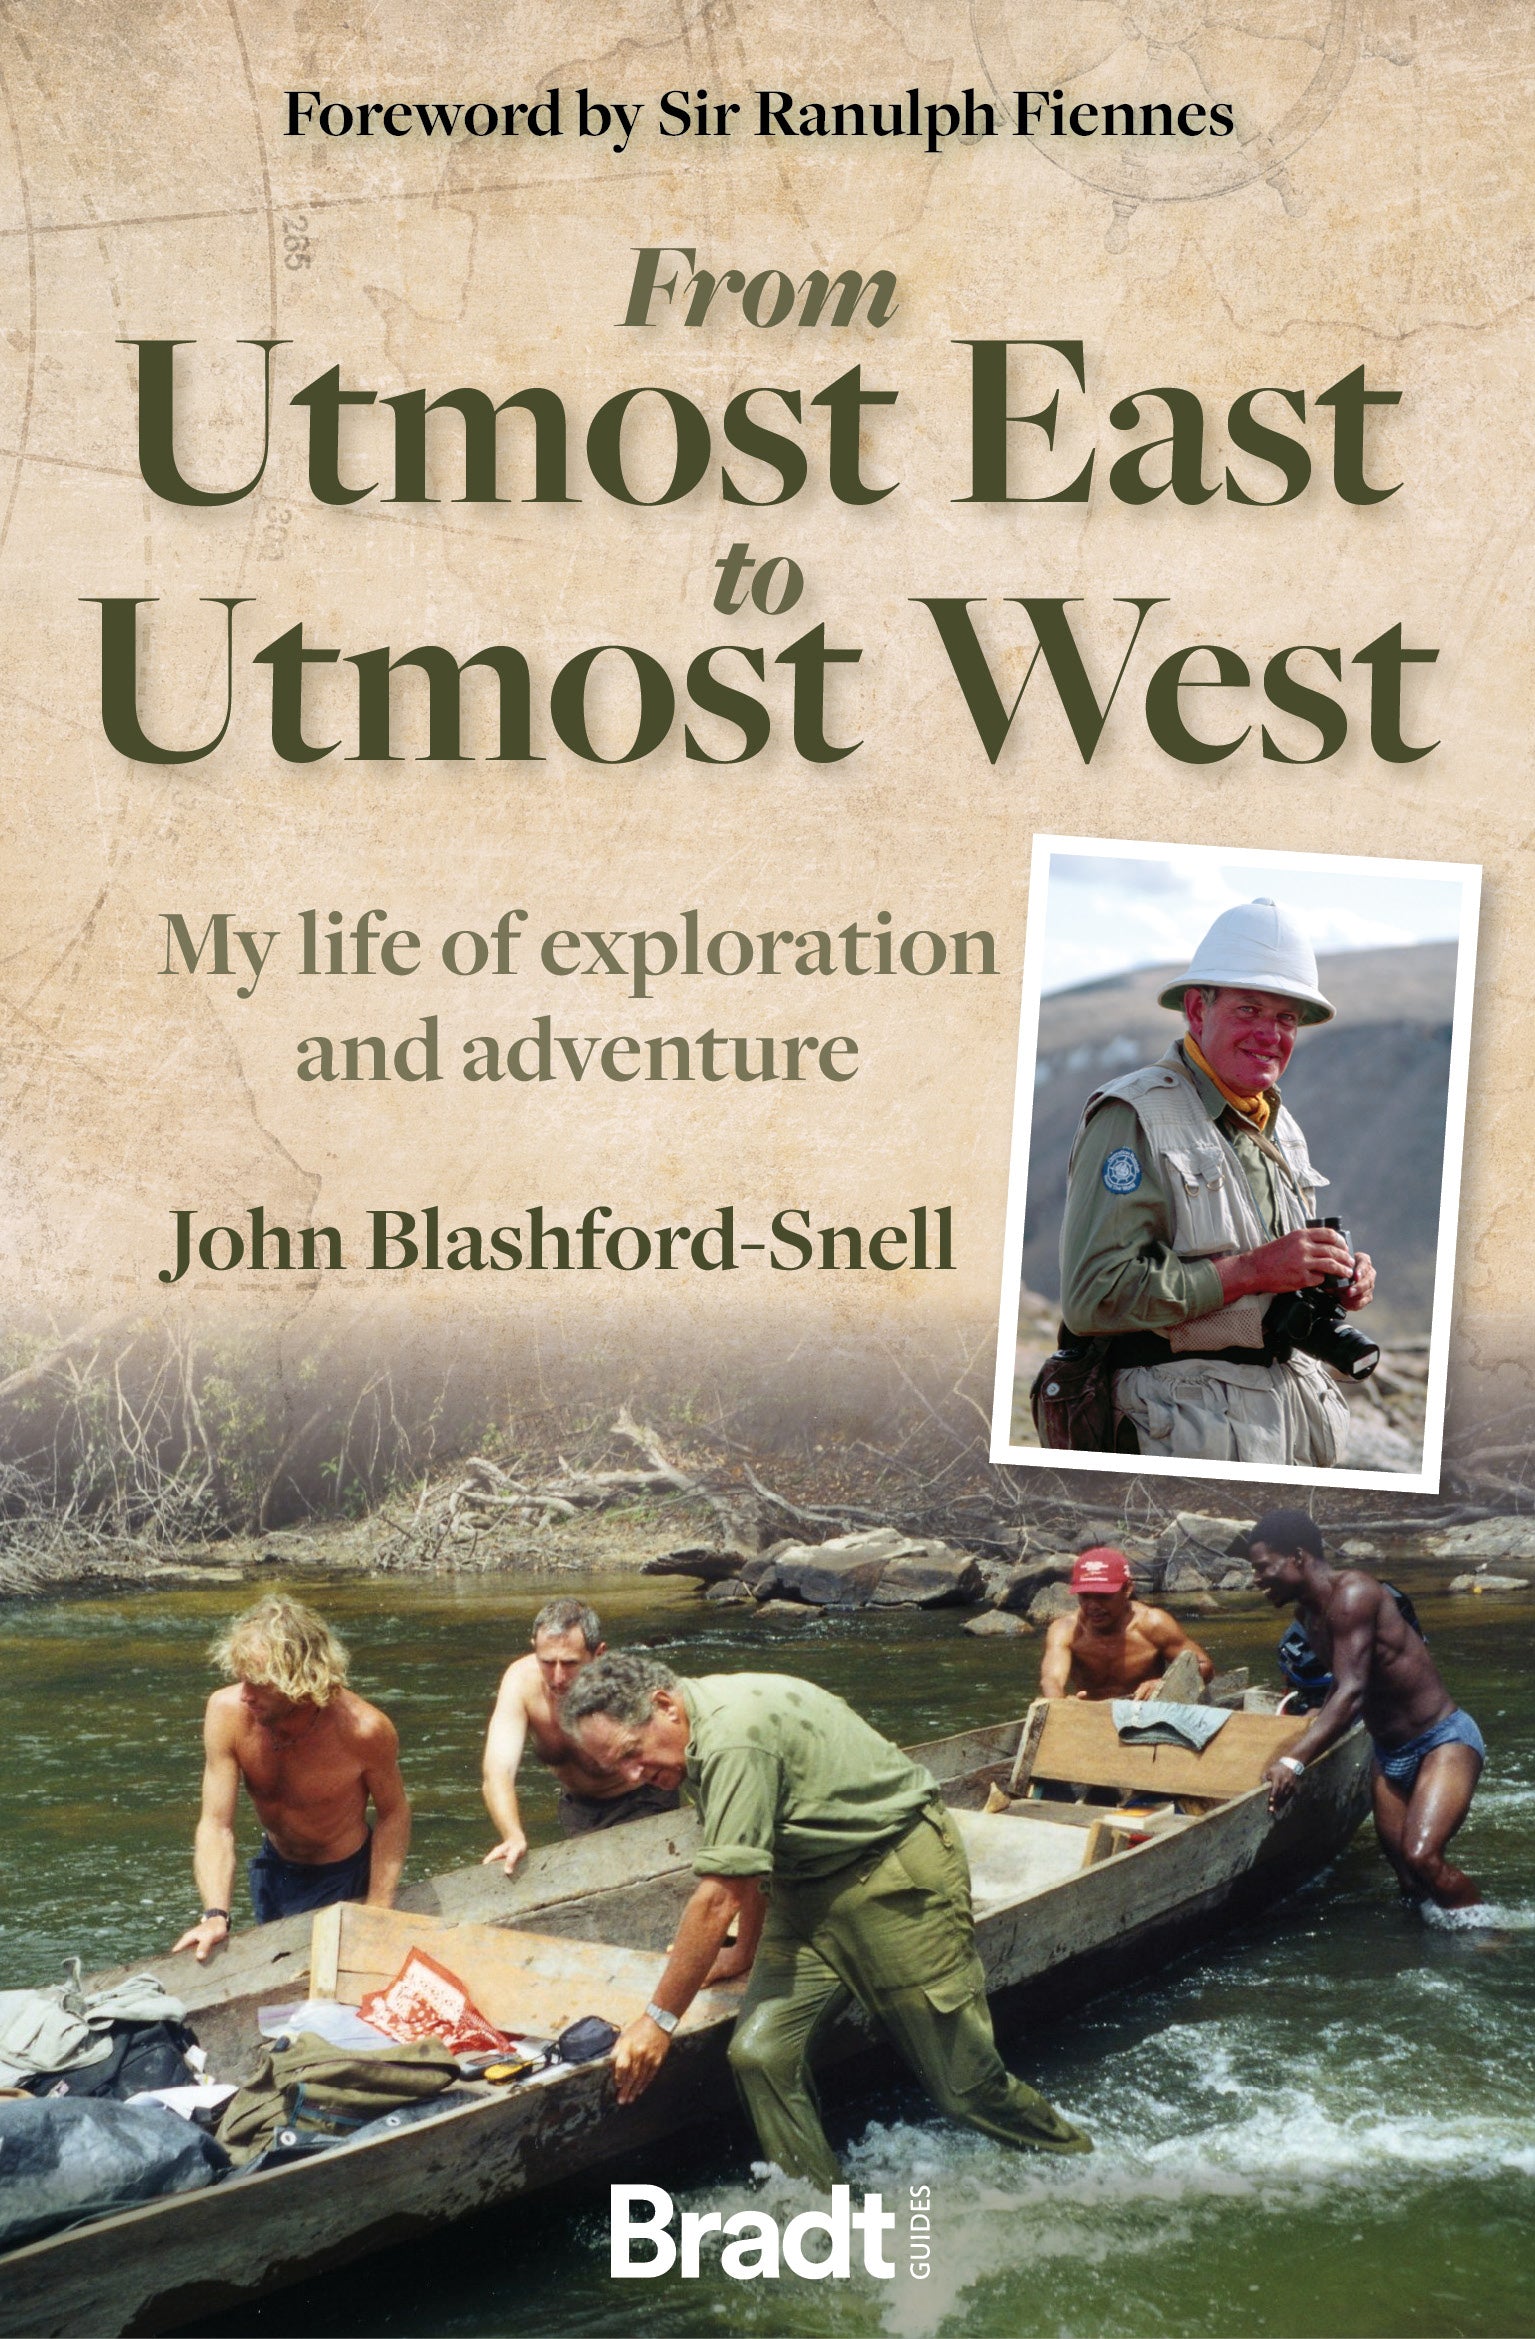 Illustrated talk and book signing with John Blashford-Snell 20/10/22